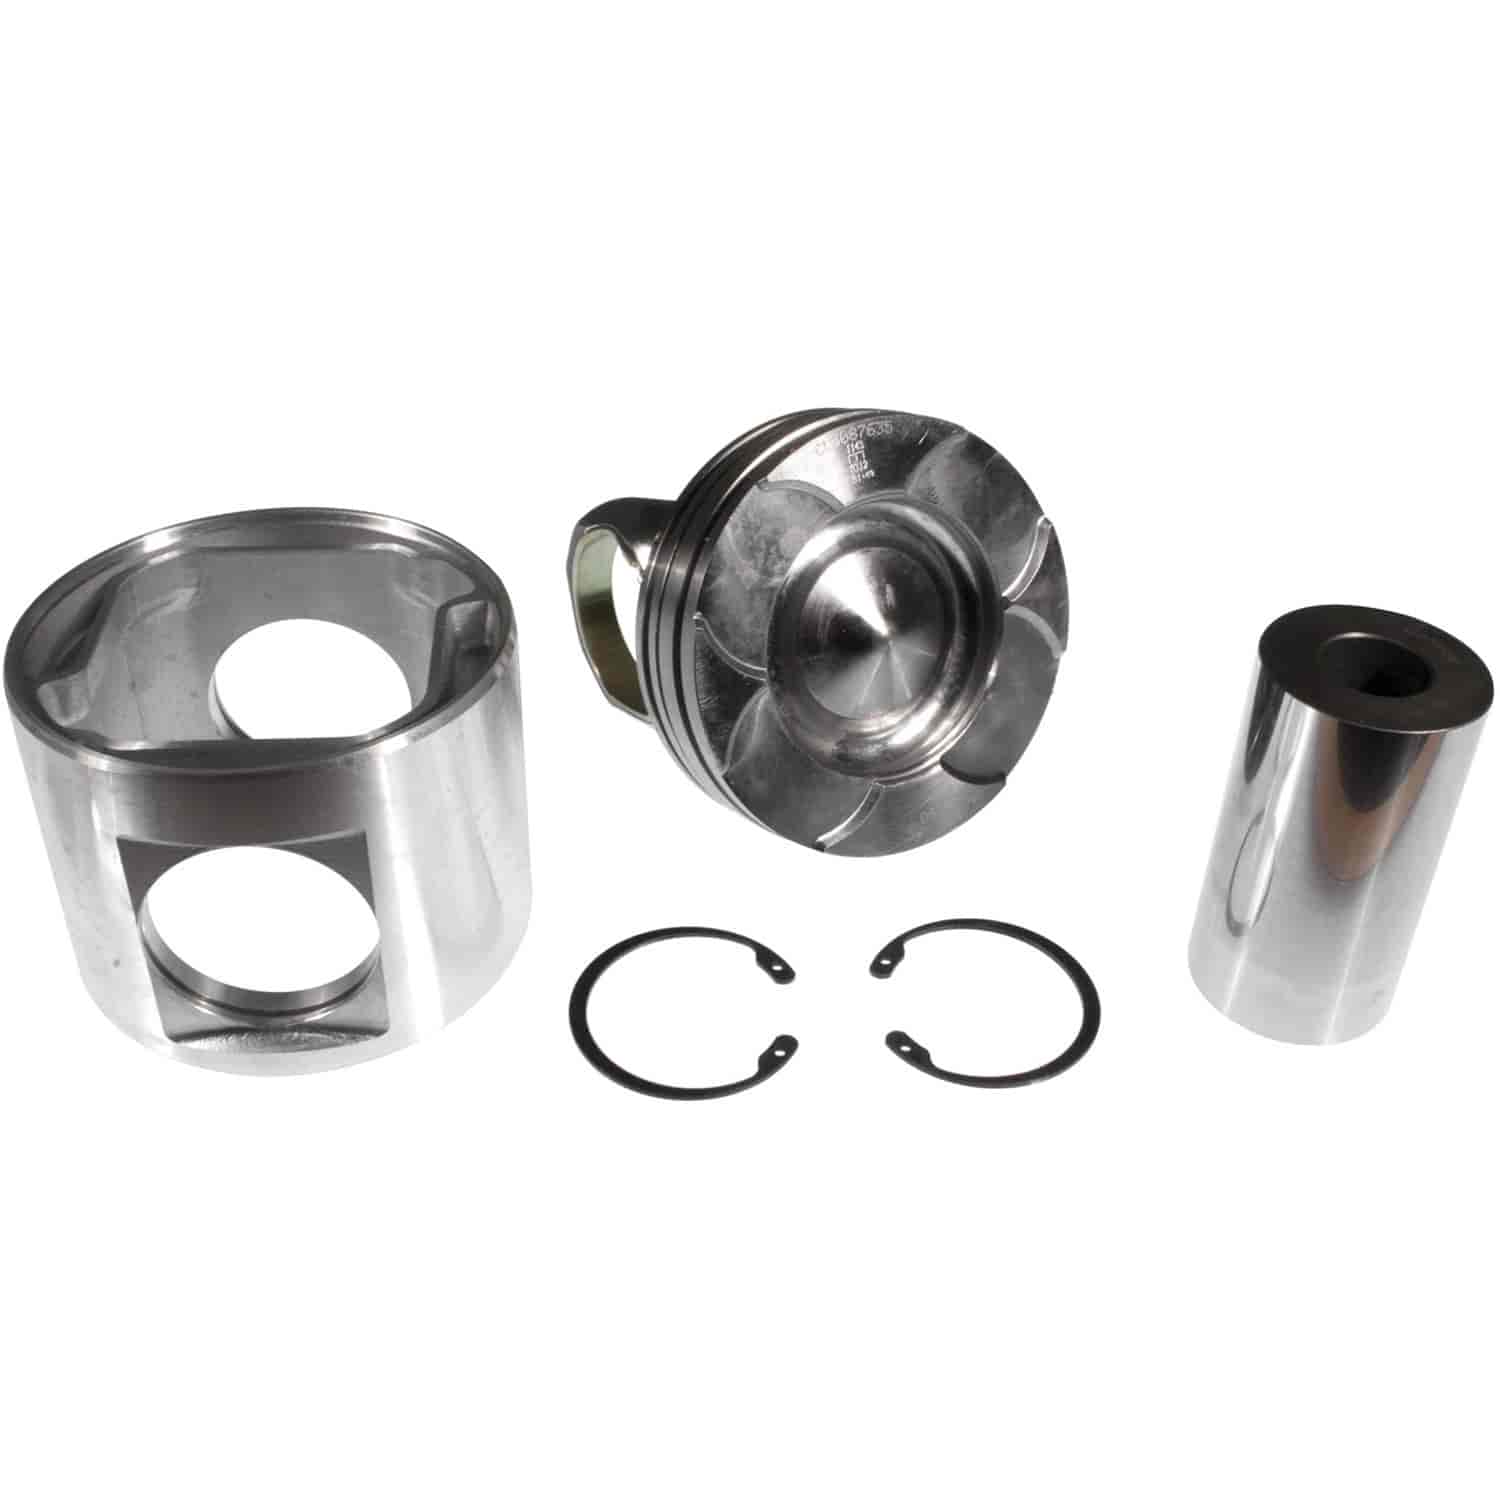 Piston Assembly for Cummins N14 Engines